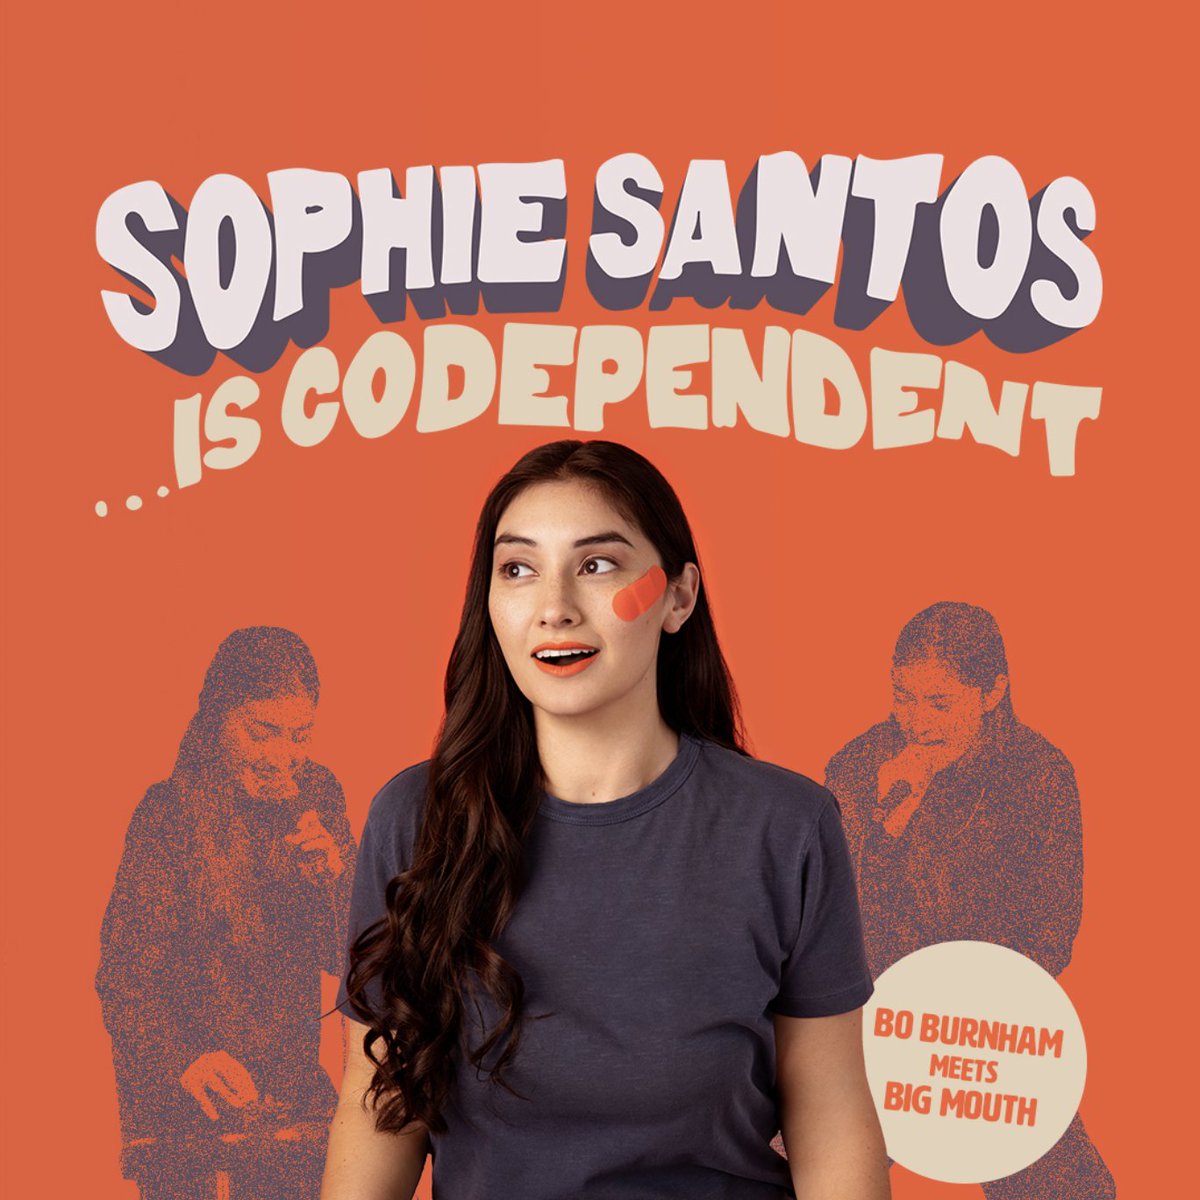 🗣 'I'm Spanish and Filipino, so I like to conquer myself. Just a little history lesson for you all...' After going through a breakup, award-winning comedian @sesantos butts heads & belts it out with their personified OCD. Fri 28 Jul, 9pm ⤵️ kingsheadtheatre.com/whats-on/sophi…